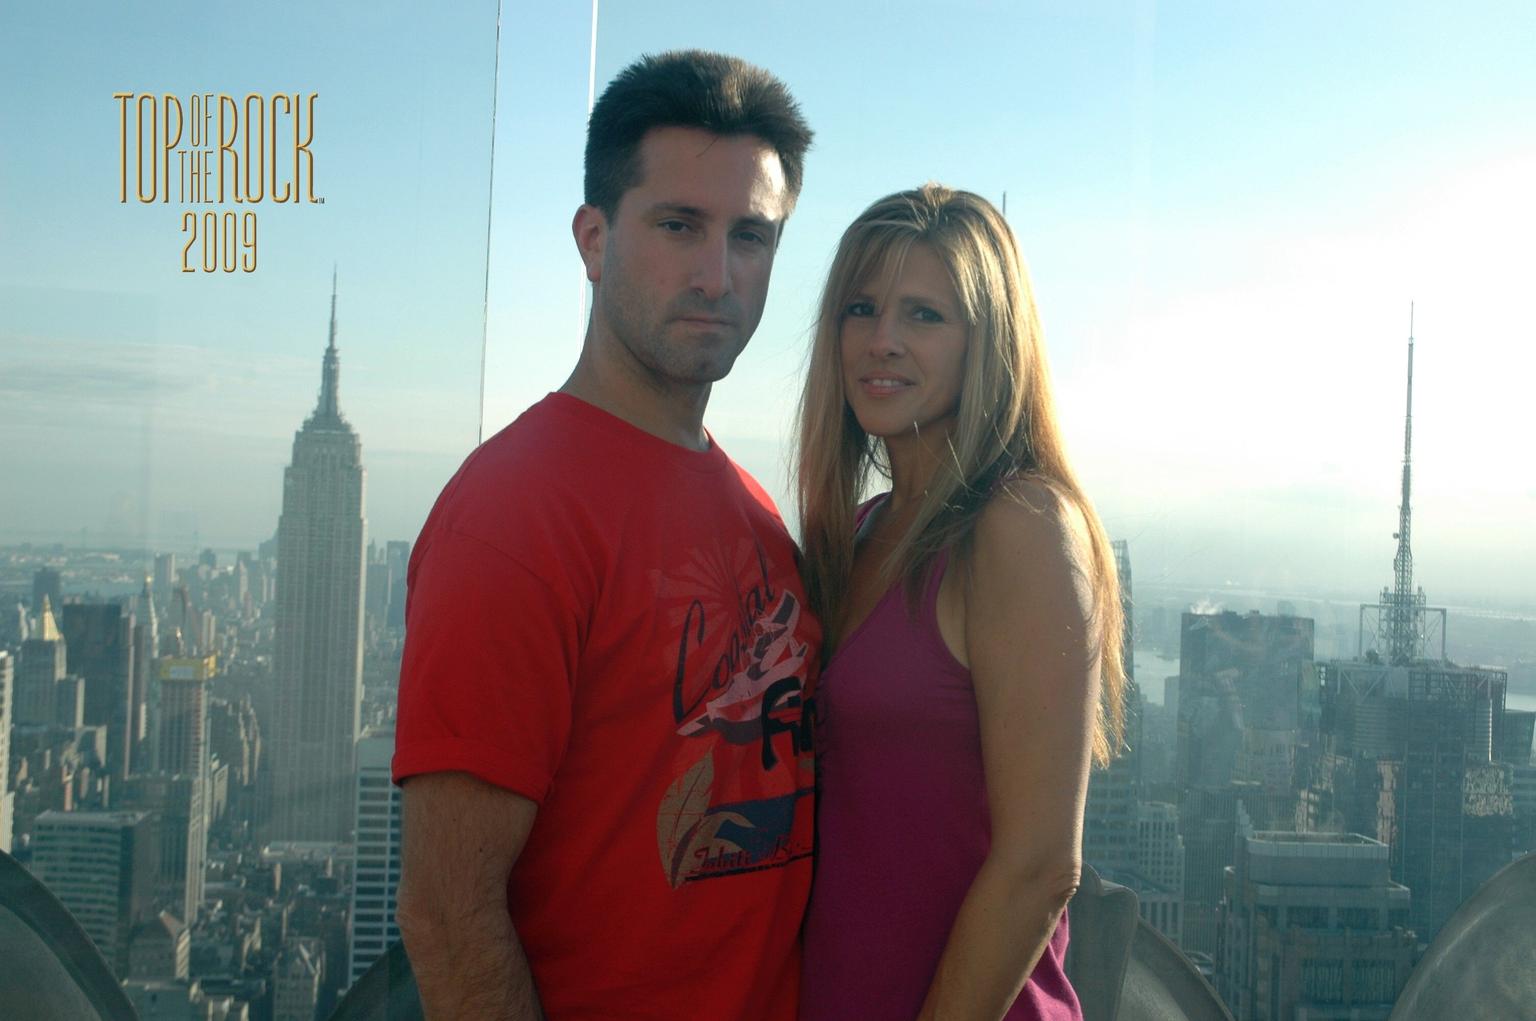 Top of the Rock Observation Deck